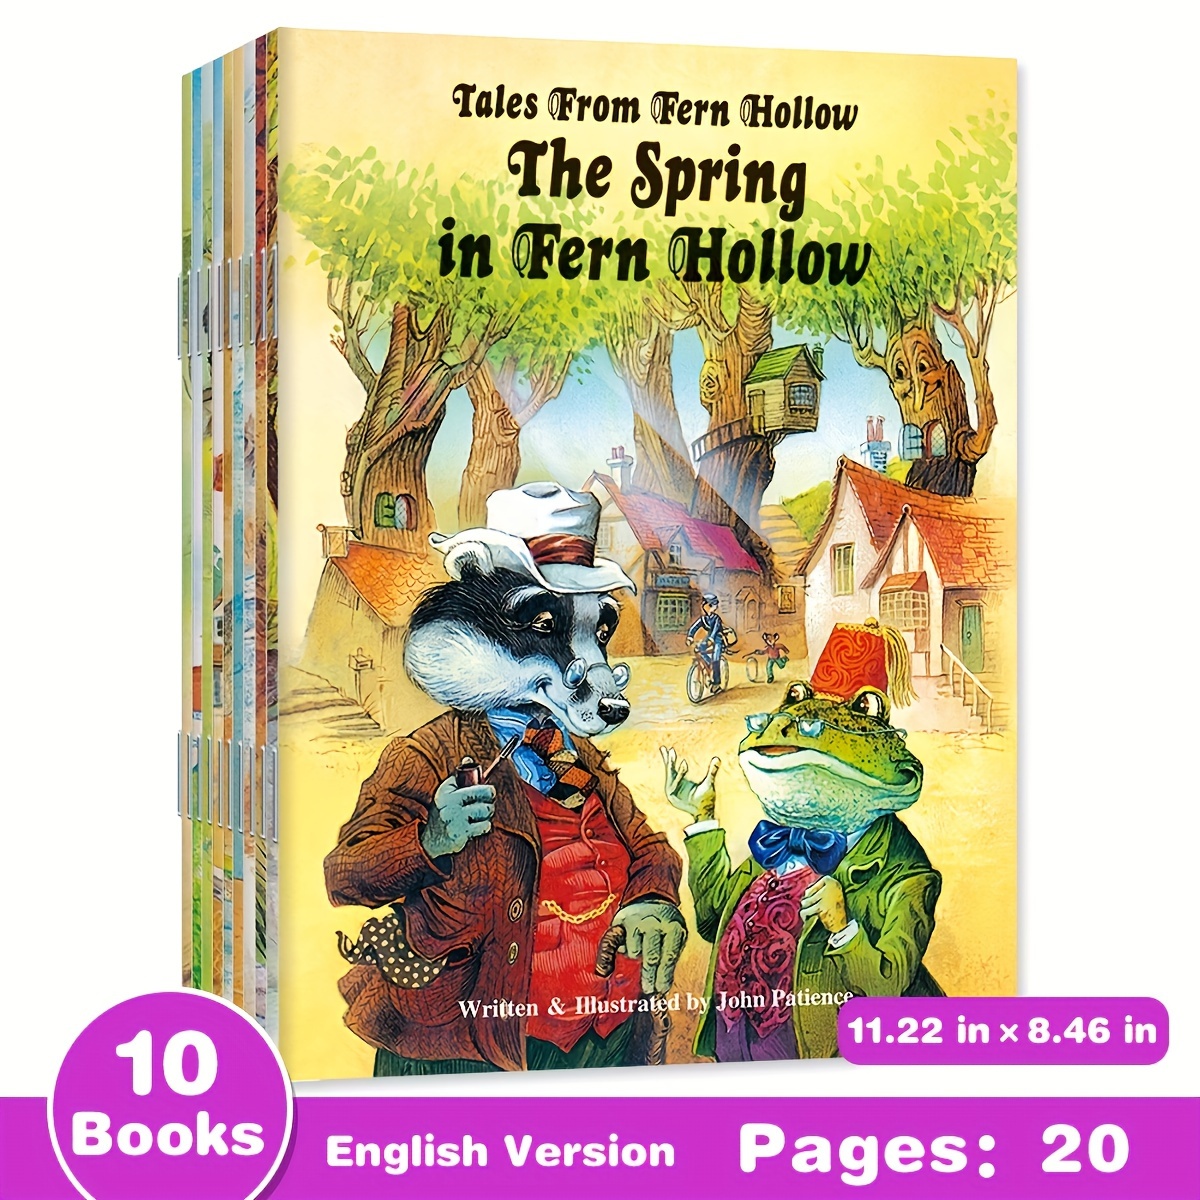 

1 Set Of 10 English Fern Hollow Fairy Tale Books With 10 Different Little Stories2